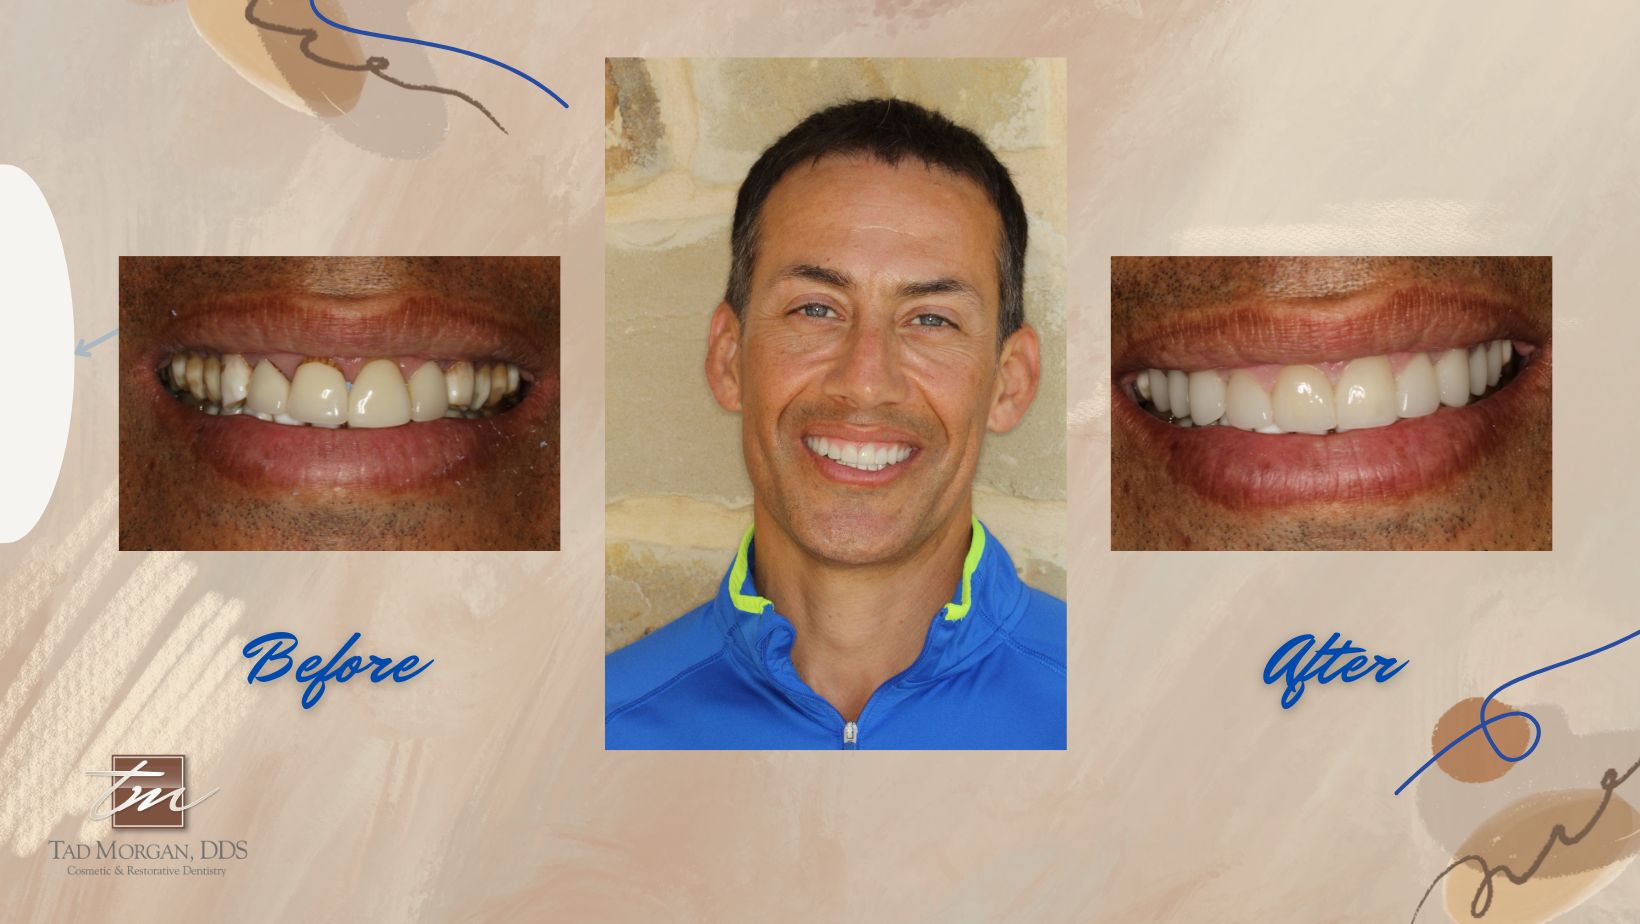 Before and after photos of a man's teeth.